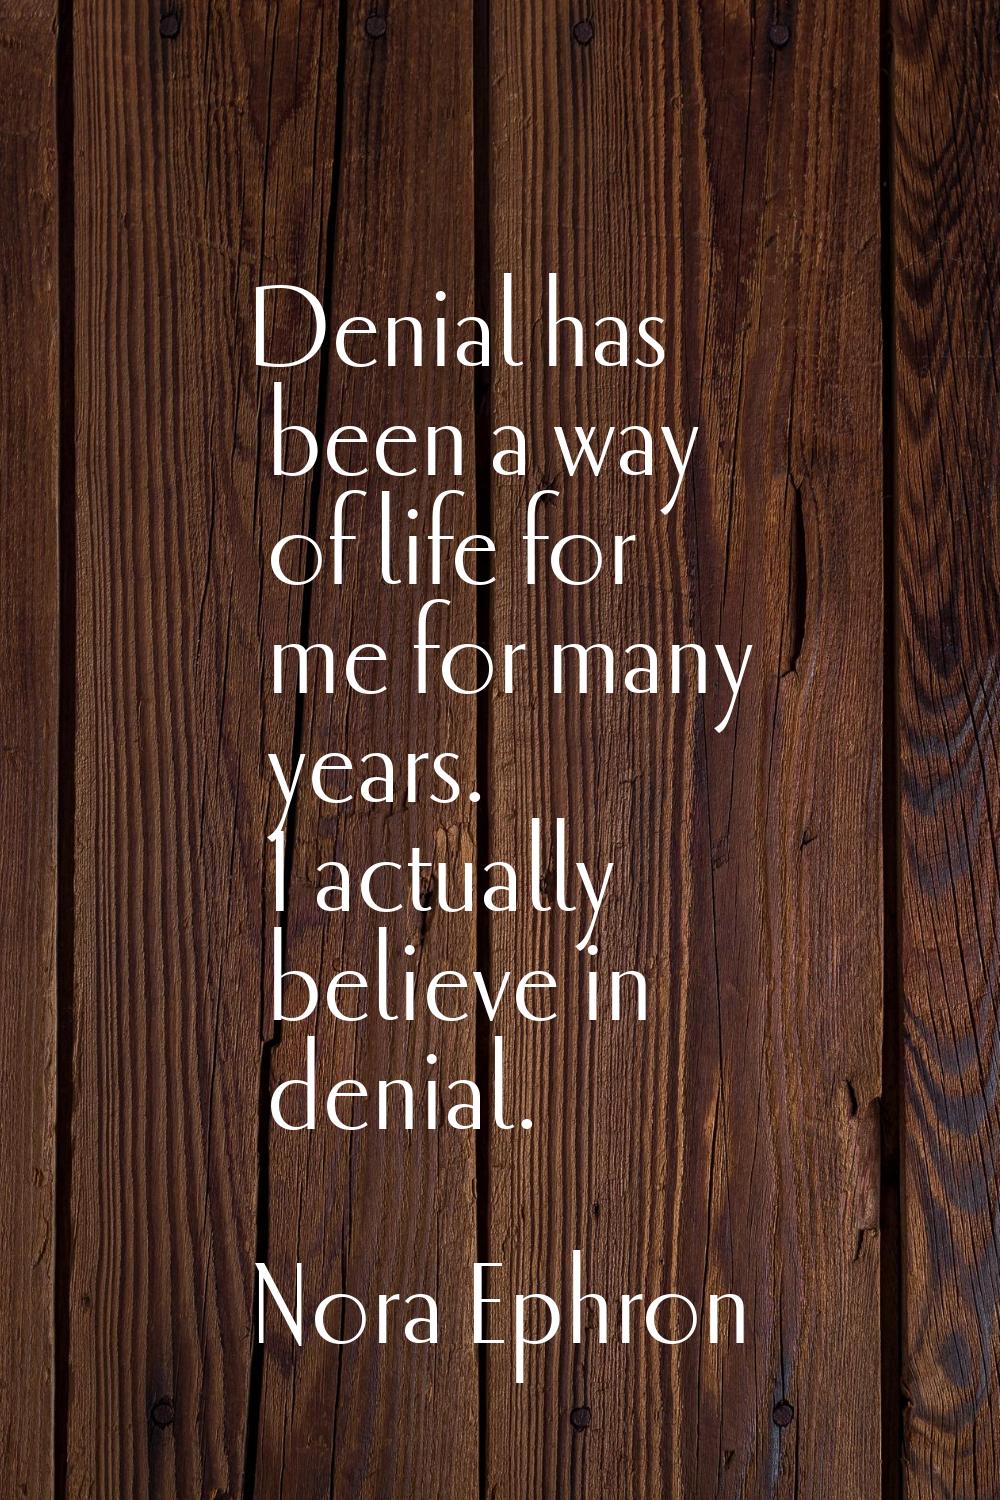 Denial has been a way of life for me for many years. I actually believe in denial.